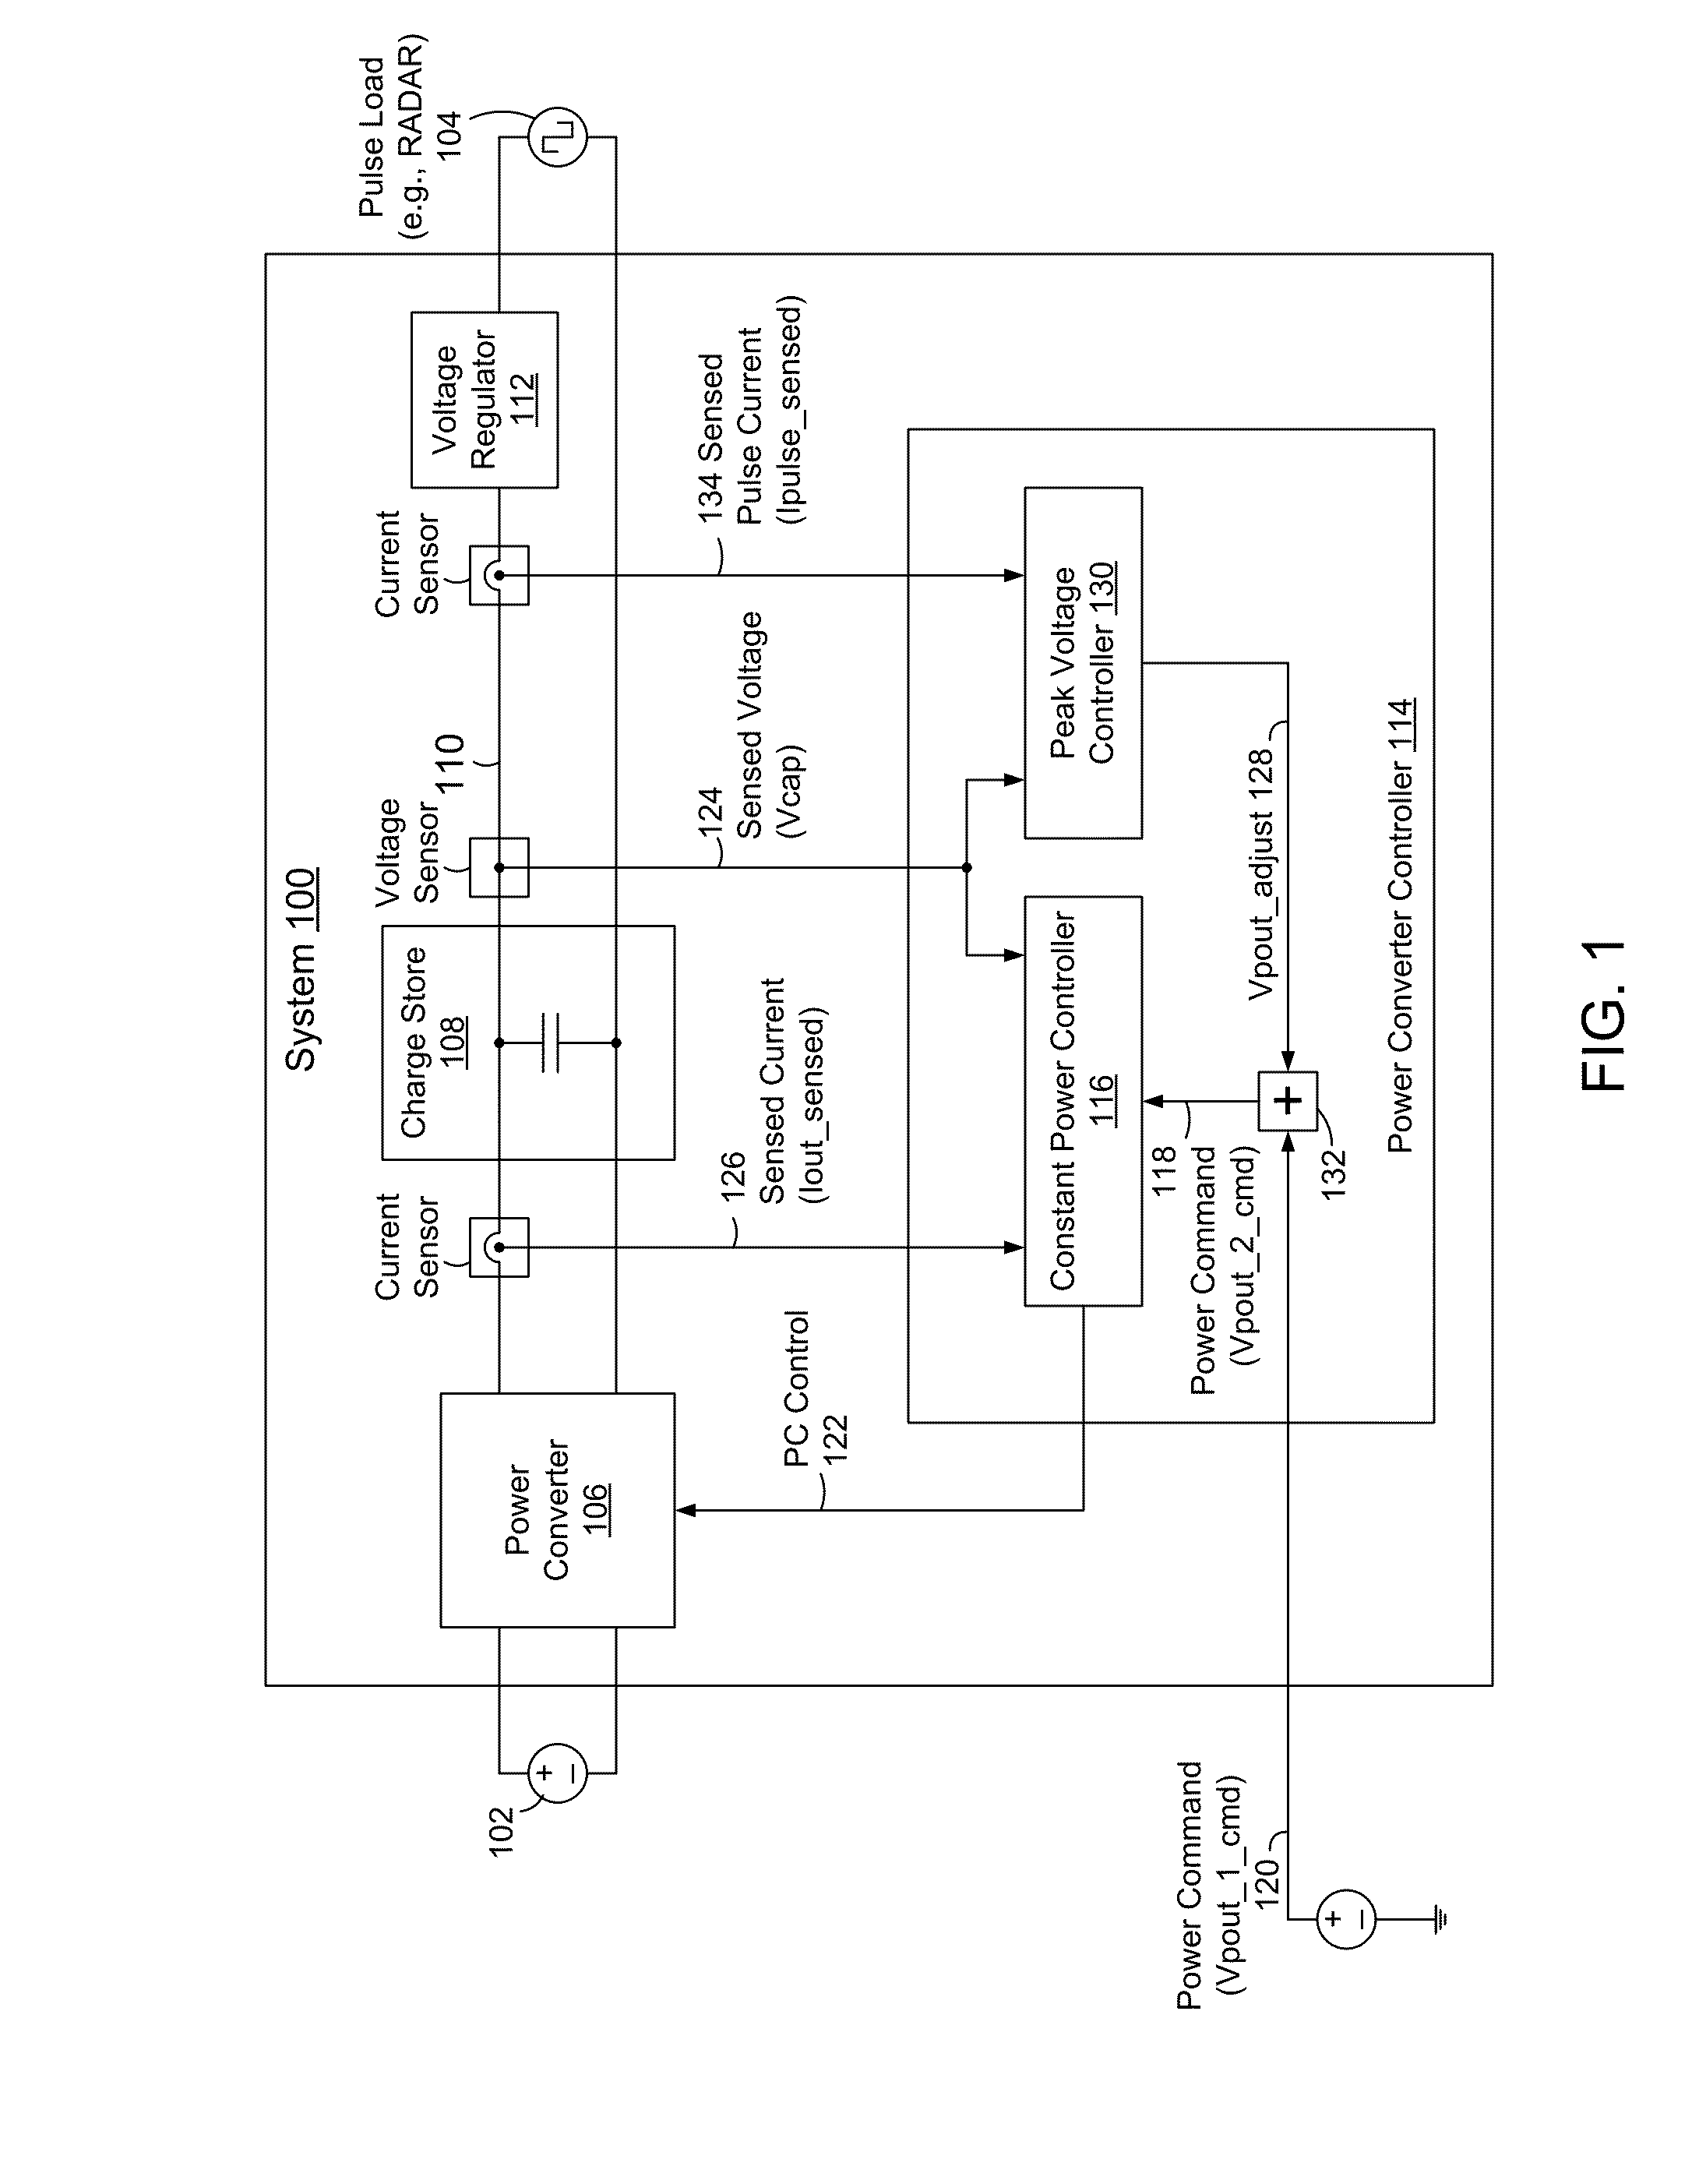 Methods and Systems to Convert a Pulse Power Demand to a Constant Power Draw